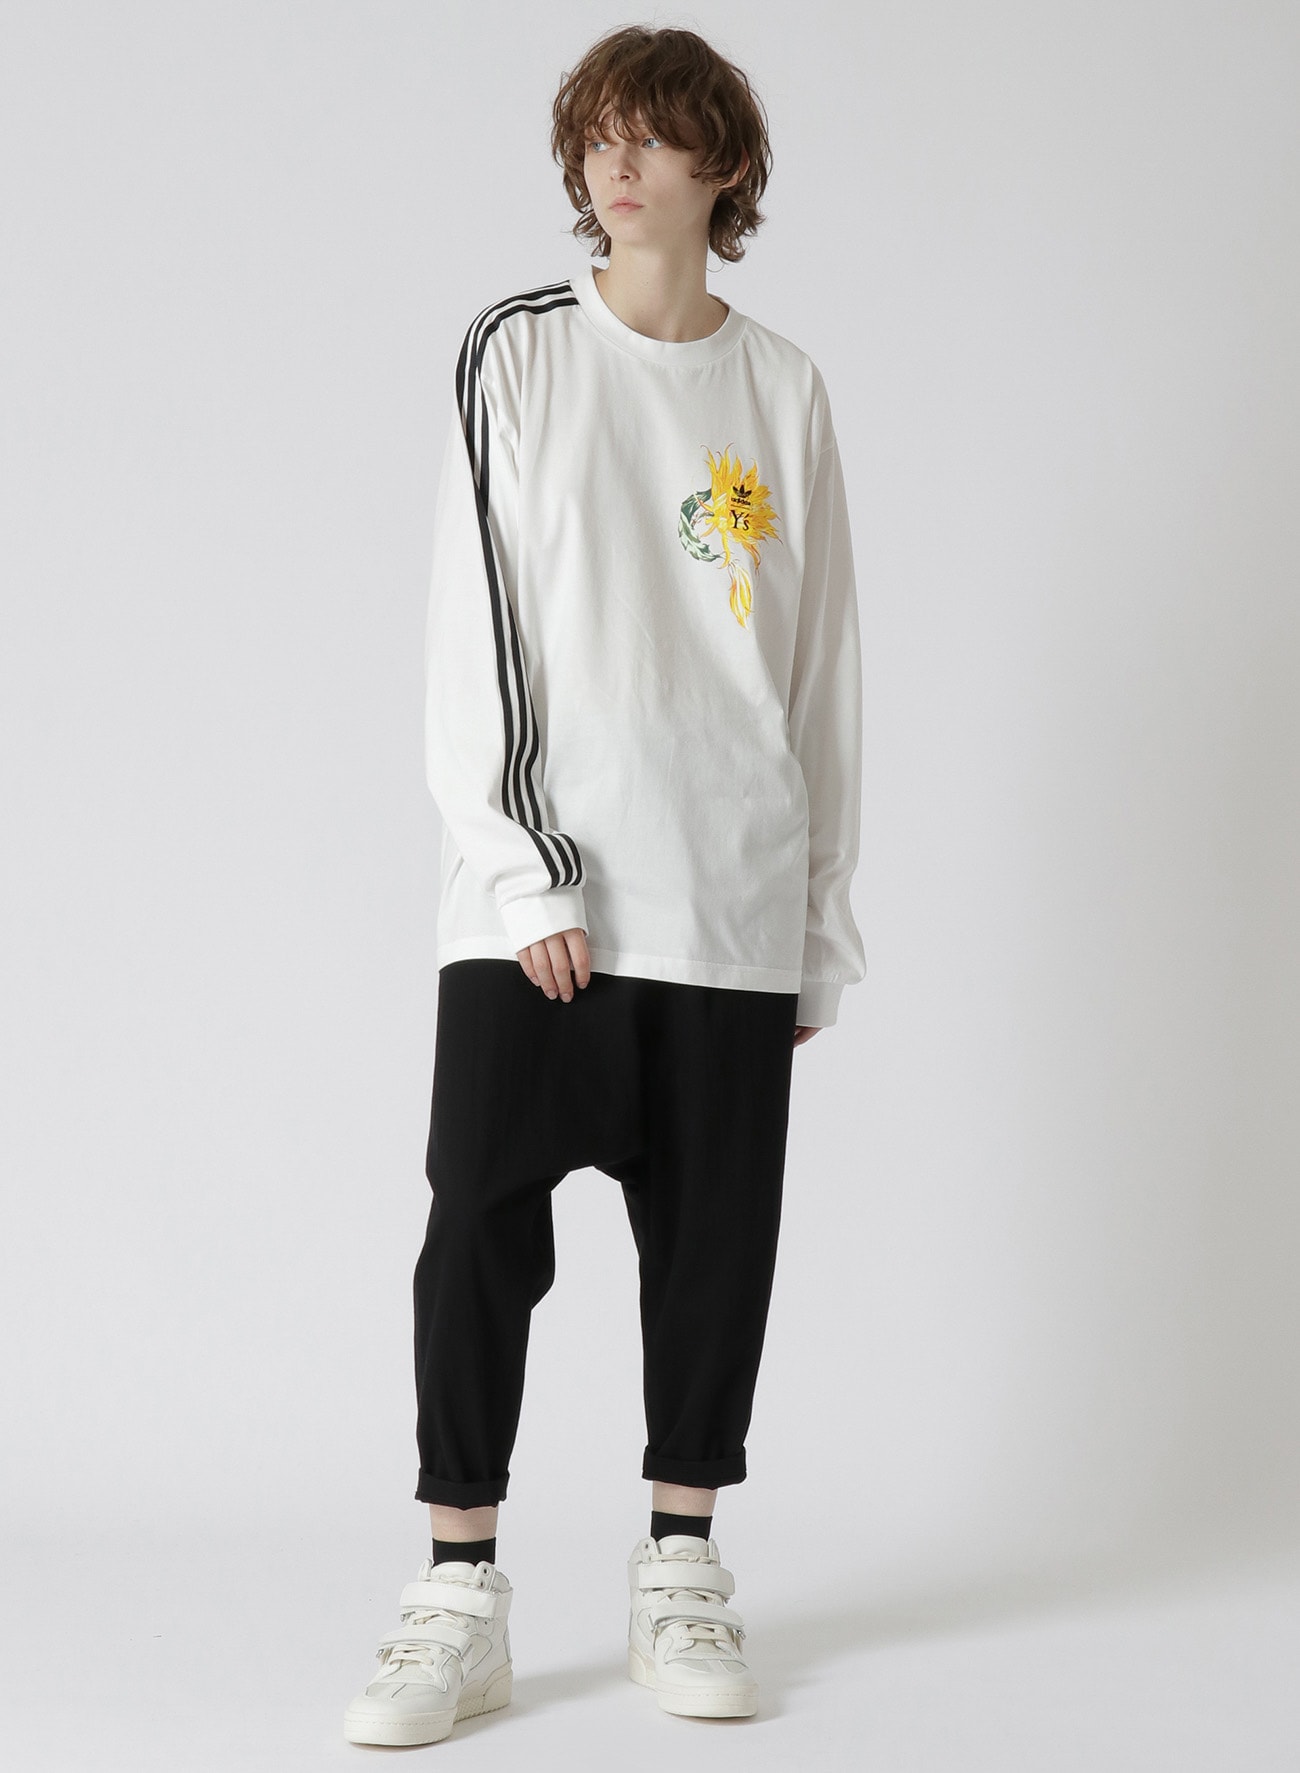 Y's x adidas]CACTUS FLOWER PRINT LONG T-SHIRT(XS White): Y's｜THE 